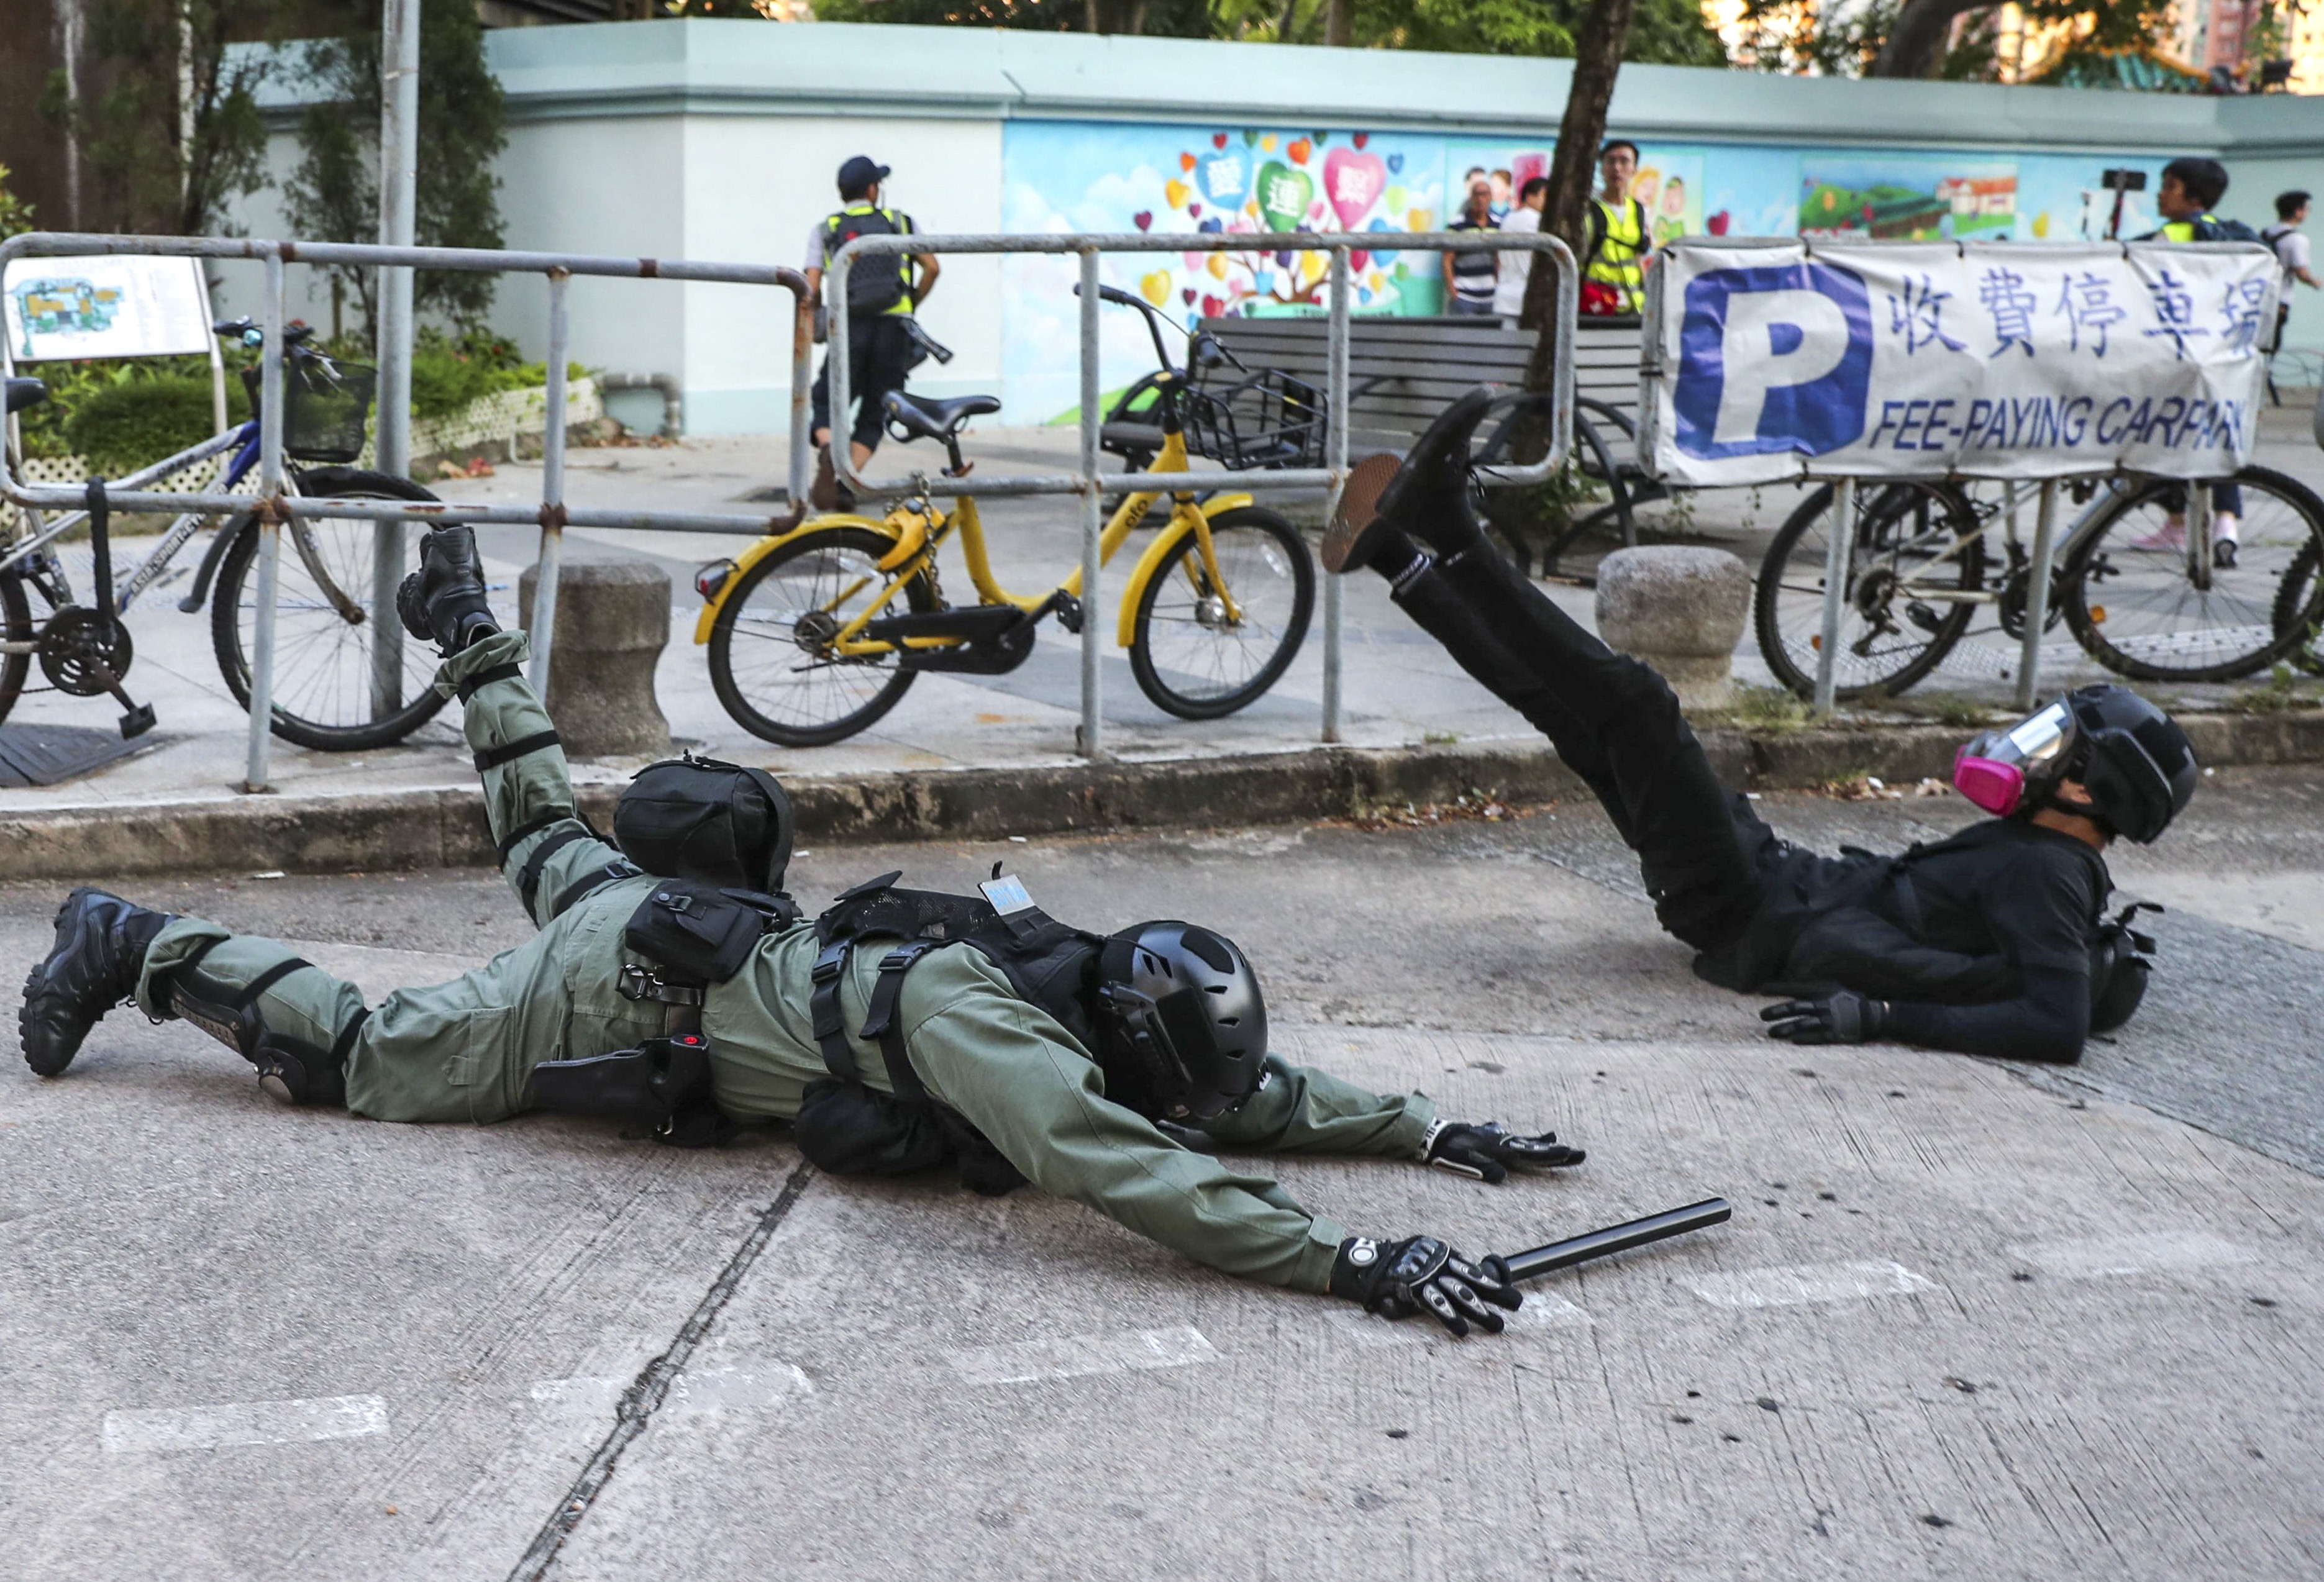 A riot police officer stumbles as he attempts to arrest an anti-government protester in Sha Tin, Hong Kong, on September 22. Protesters and police have a lot more in common than Beijing and the police. Photo: Sam Tsang